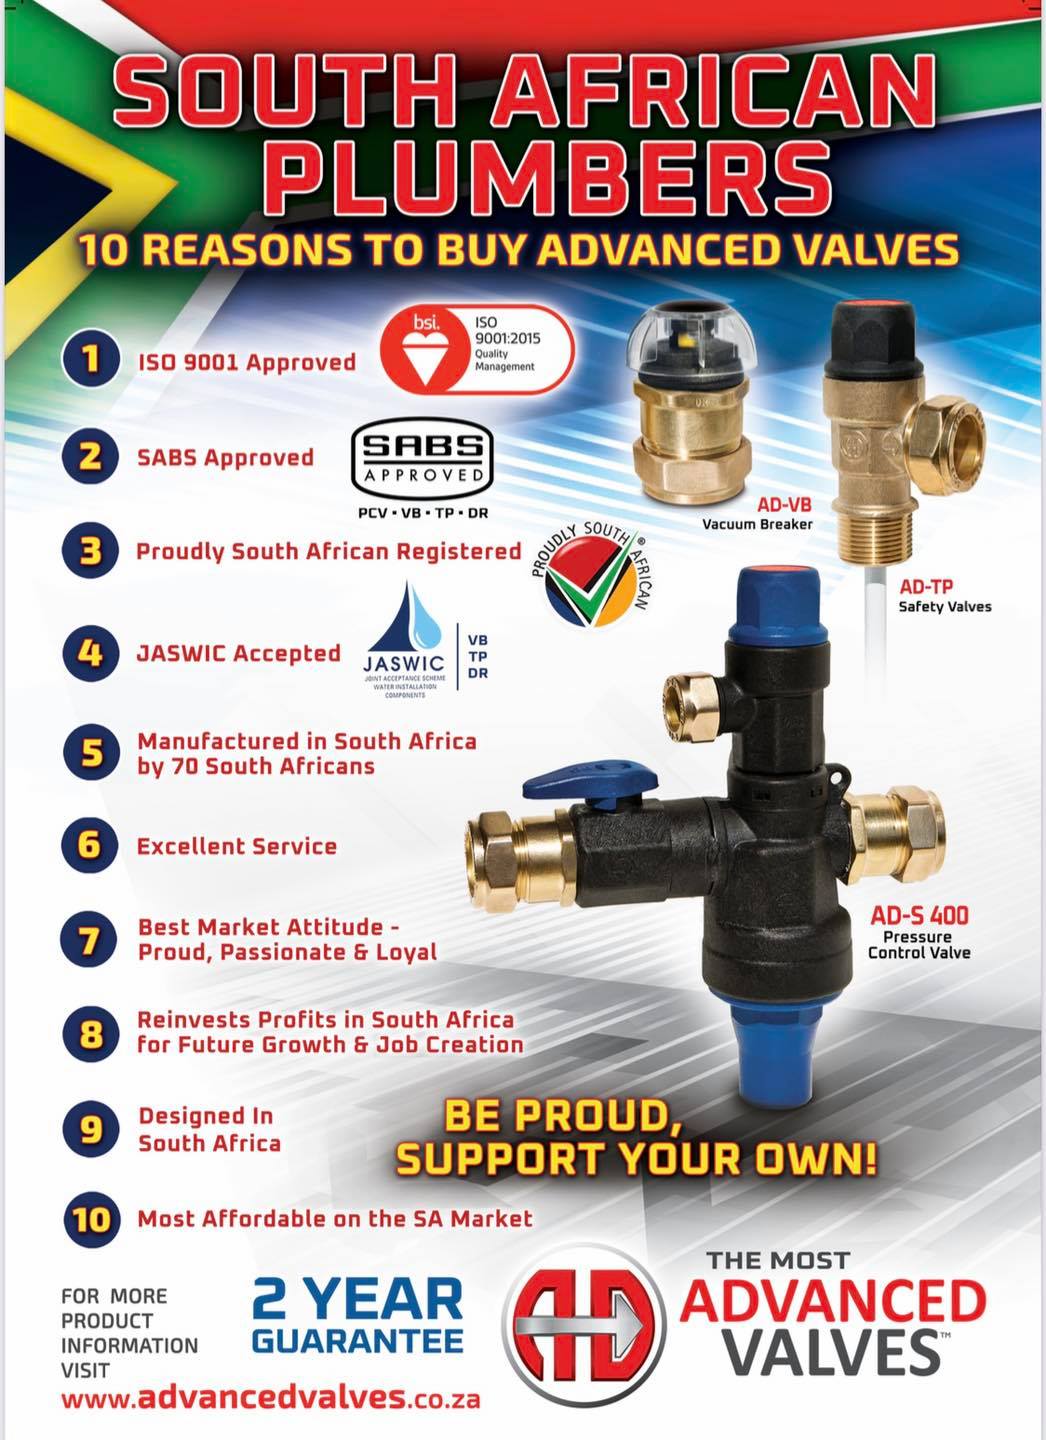 Geyser products for plumbers